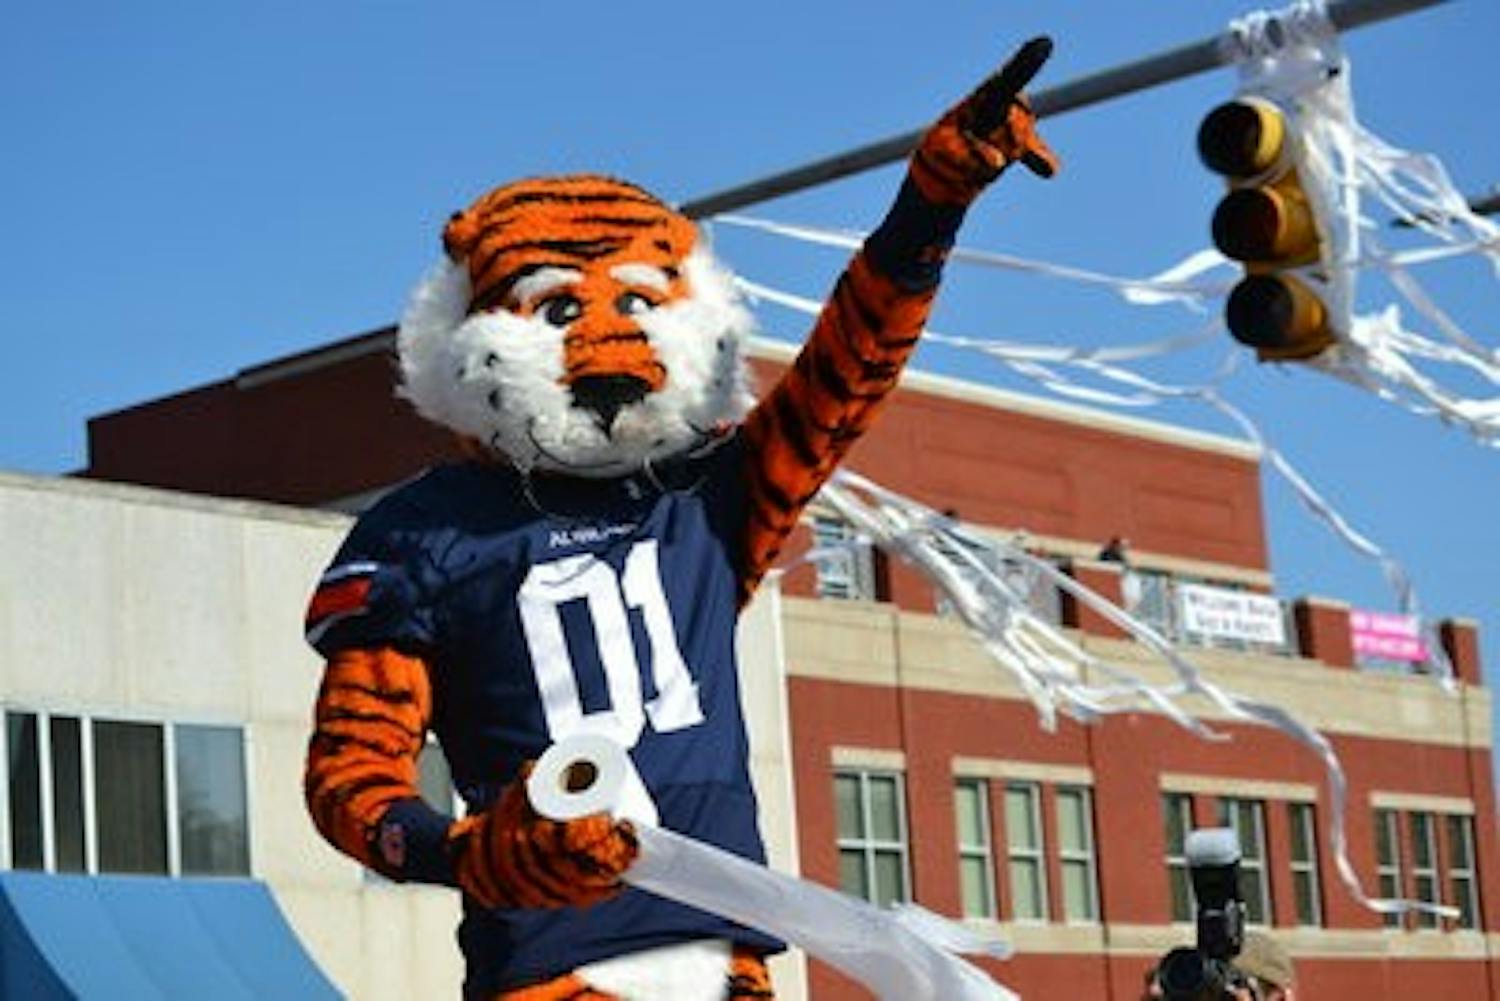 Aubie prepares to throw a roll of toilet paper at the oak trees.
(Raye May / PHOTO EDITOR)